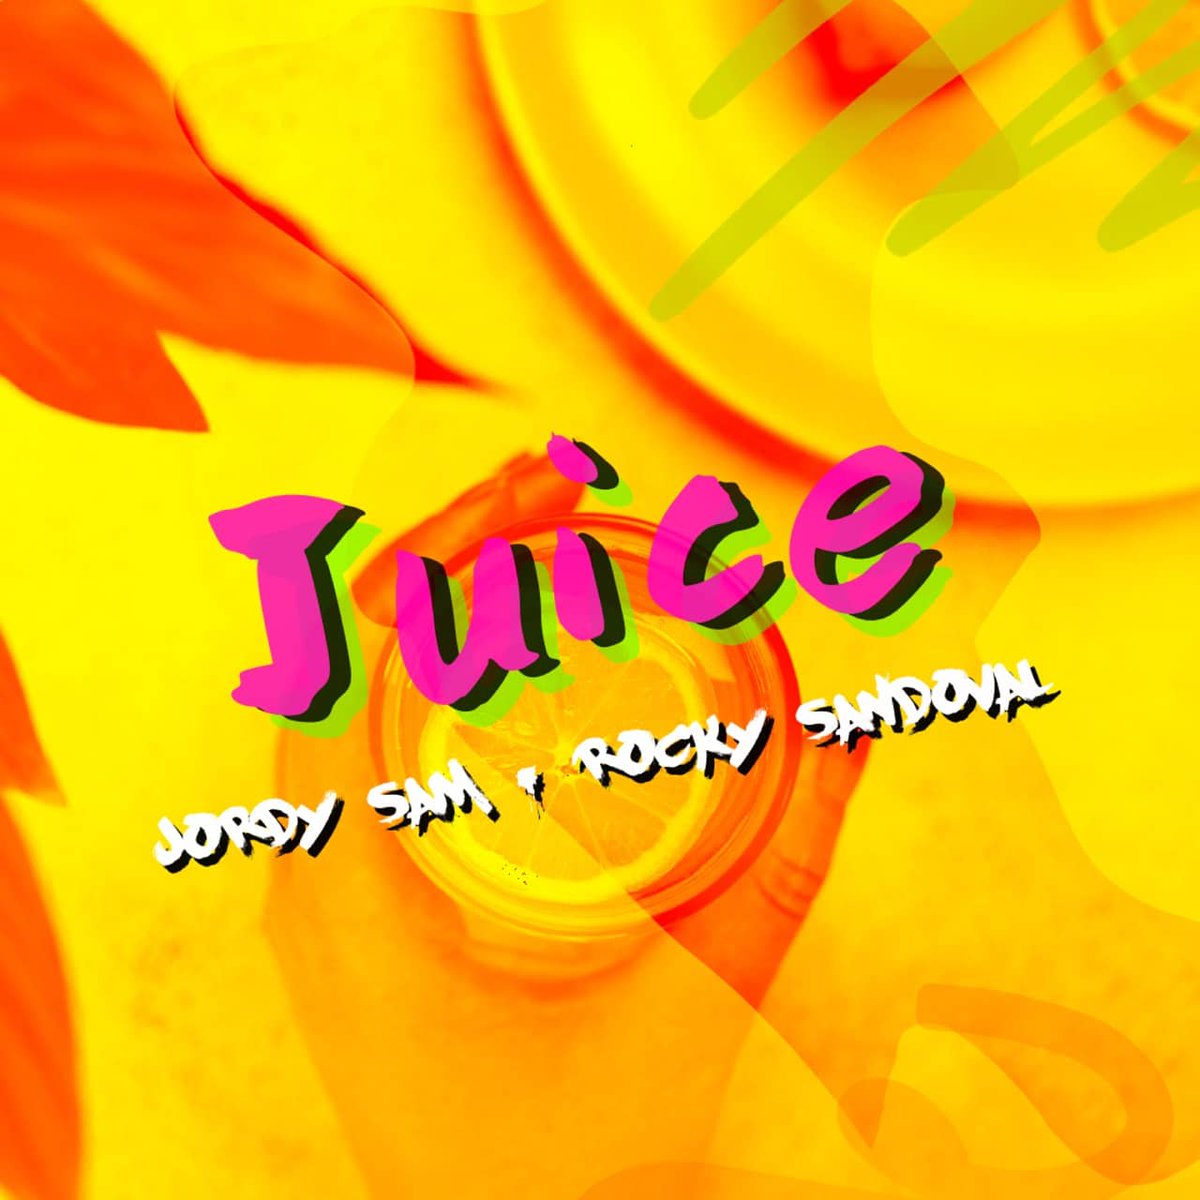 🚨ATTENTION😳🚨 'JUICE' Ft. Rocky Sandoval (Produced, Mixed and Mastered by me) DROPS THIS FRIDAY!😱
.
.
.
#Jordysam #MrYesIam #Lionsden360 #WelcomeToTheLionsDen #rockysandoval #artists #singersongwriters #Bremerton #Tacoma #PNW #pnwmusic #pnwartists #followus #staytuned